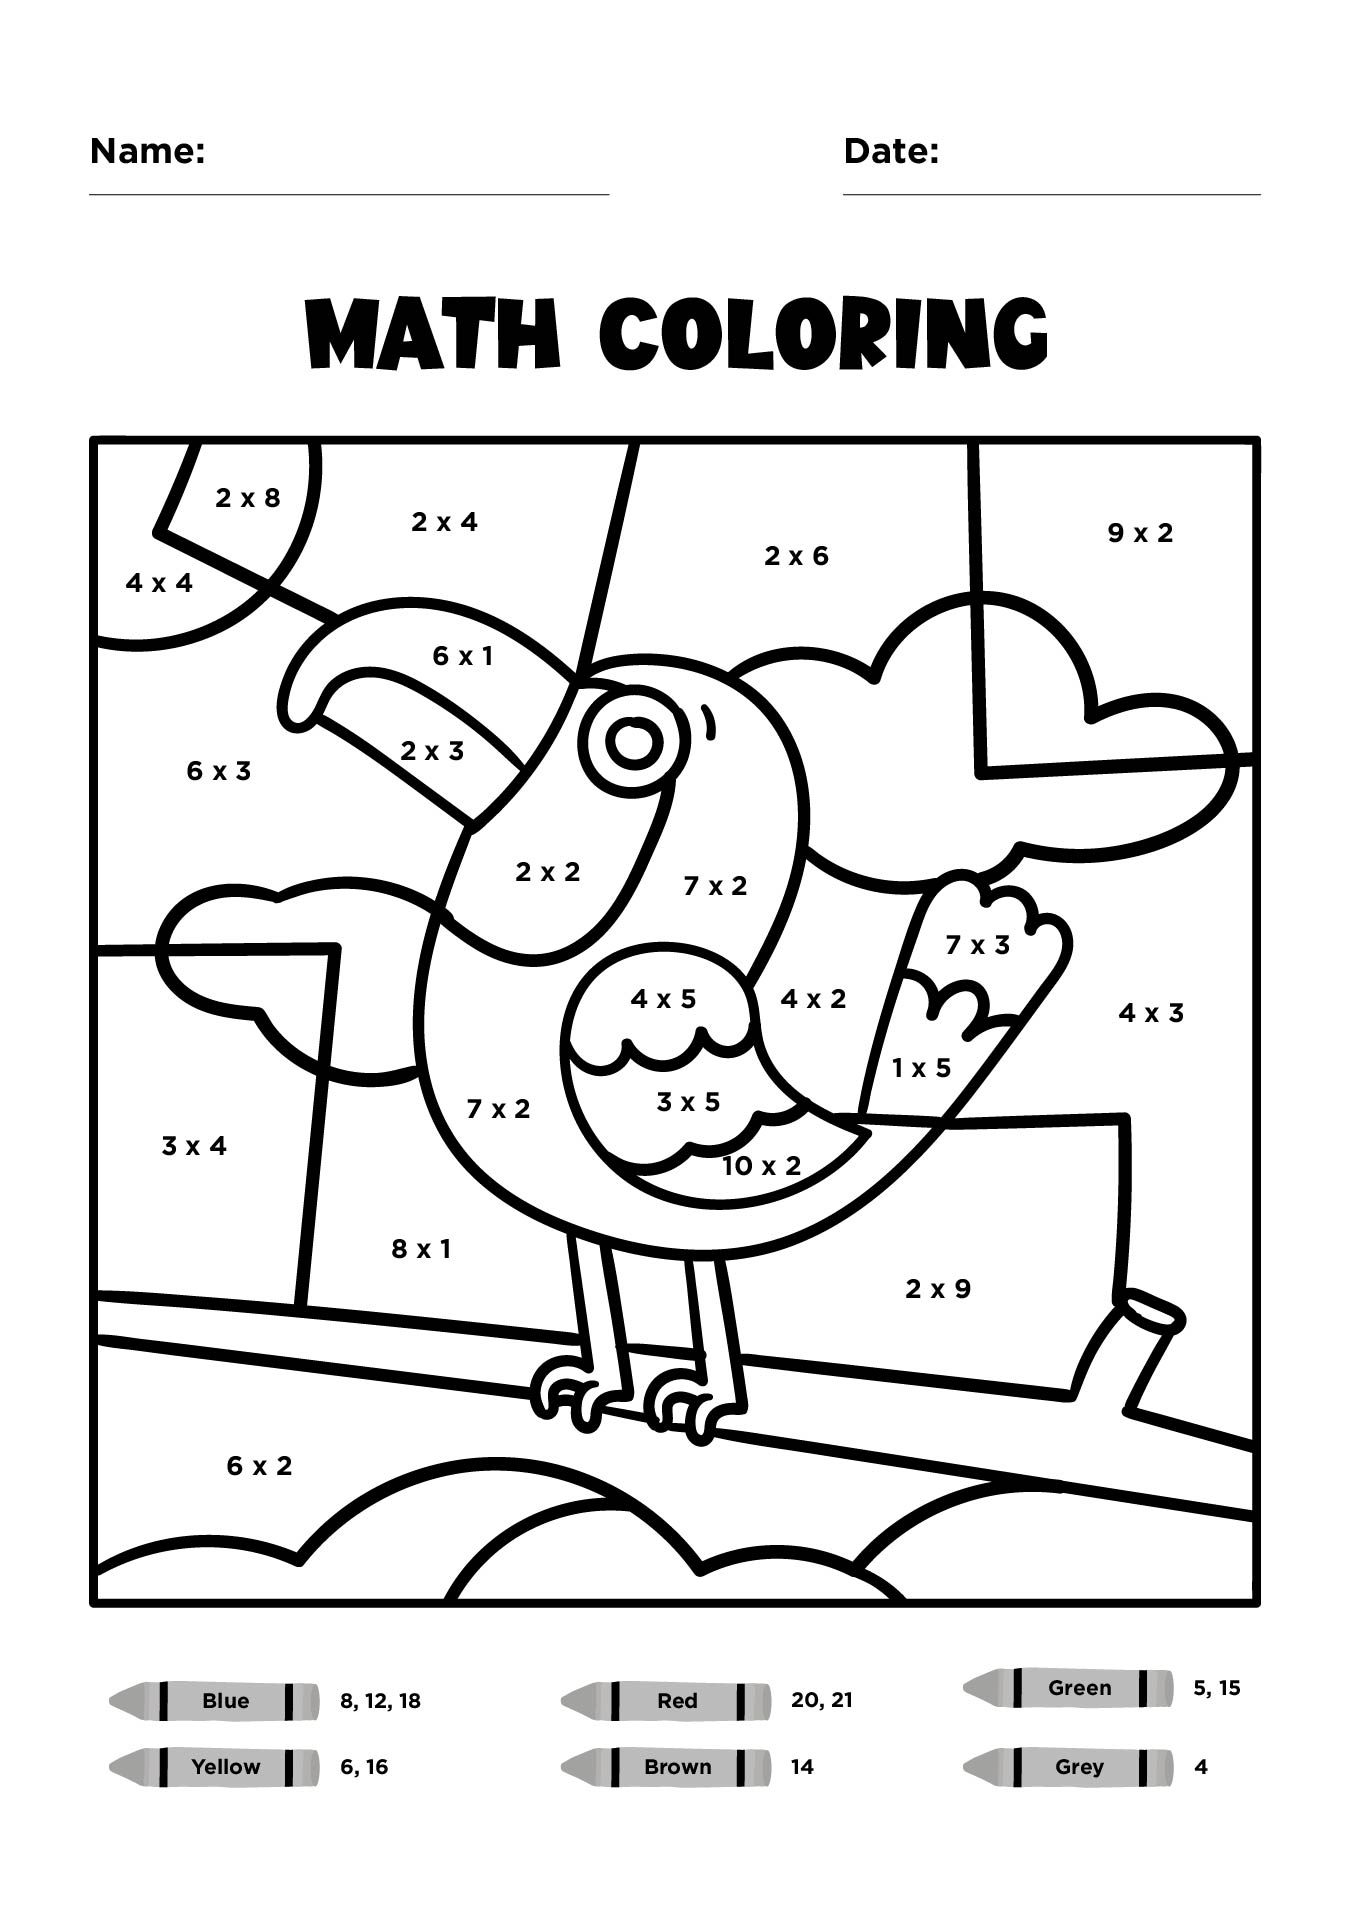 Printable Math Coloring Worksheets For 3rd Grade